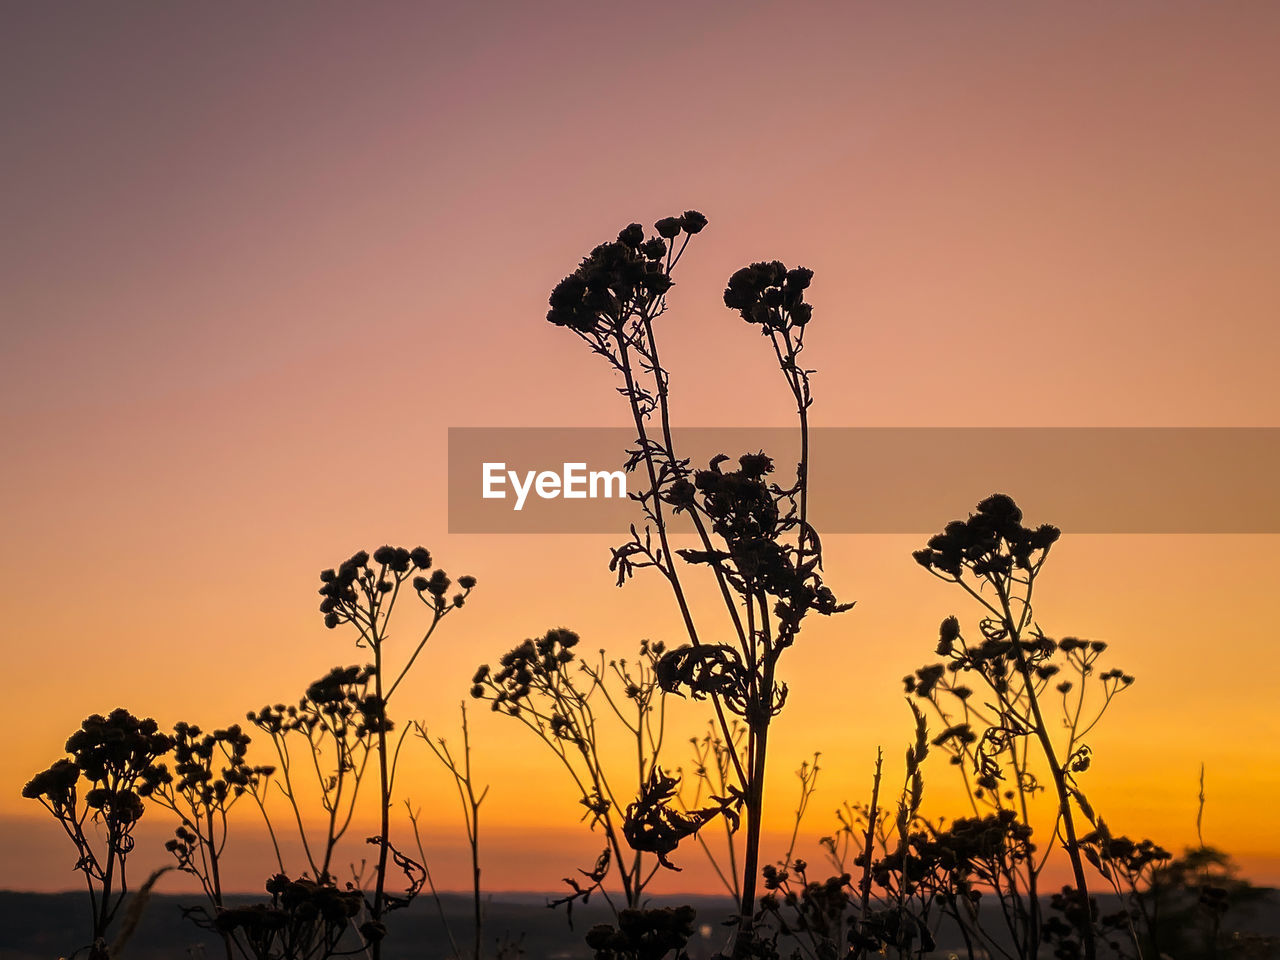 sunset, sky, plant, nature, silhouette, beauty in nature, landscape, horizon, savanna, scenics - nature, orange color, environment, no people, tranquility, land, sun, dusk, field, outdoors, twilight, tranquil scene, sunlight, prairie, flower, dramatic sky, evening, rural scene, non-urban scene, back lit, copy space, tree, yellow, travel destinations, vibrant color, afterglow, idyllic, grass, romantic sky, growth, flowering plant